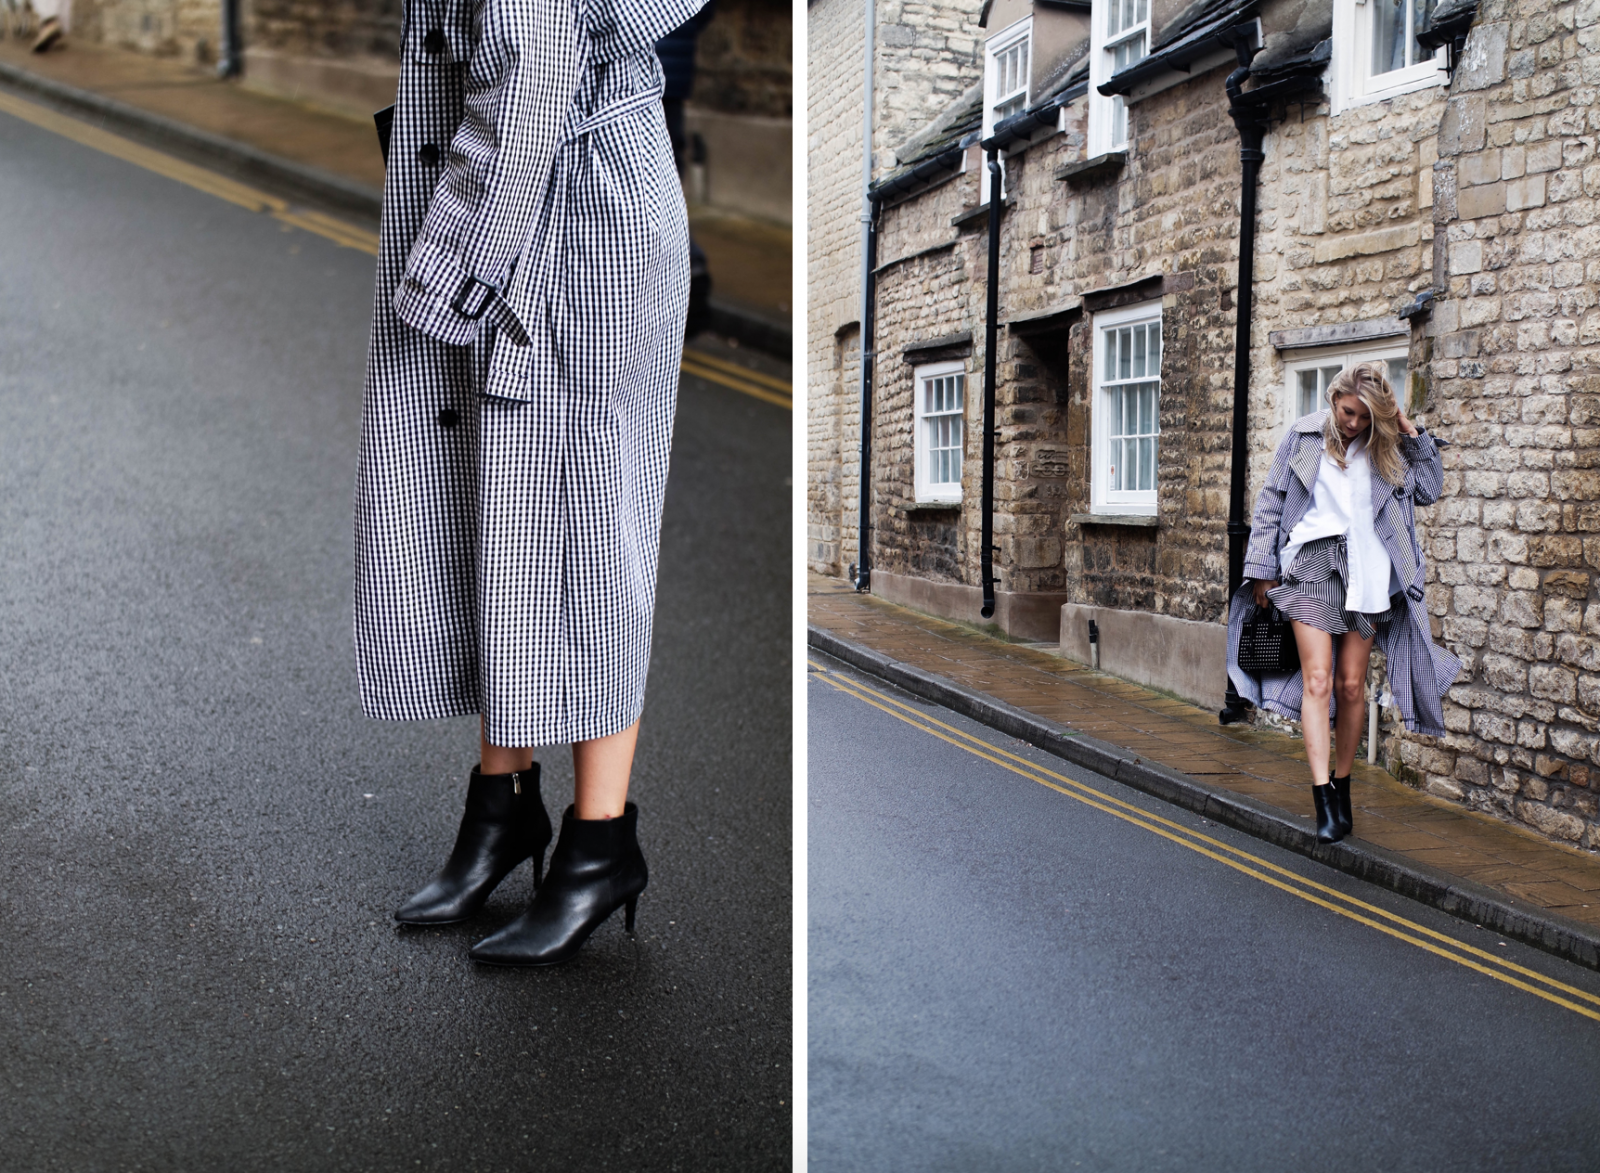 DIY Smooth Spring Legs with Panasonic - Monochrome Trench Coat